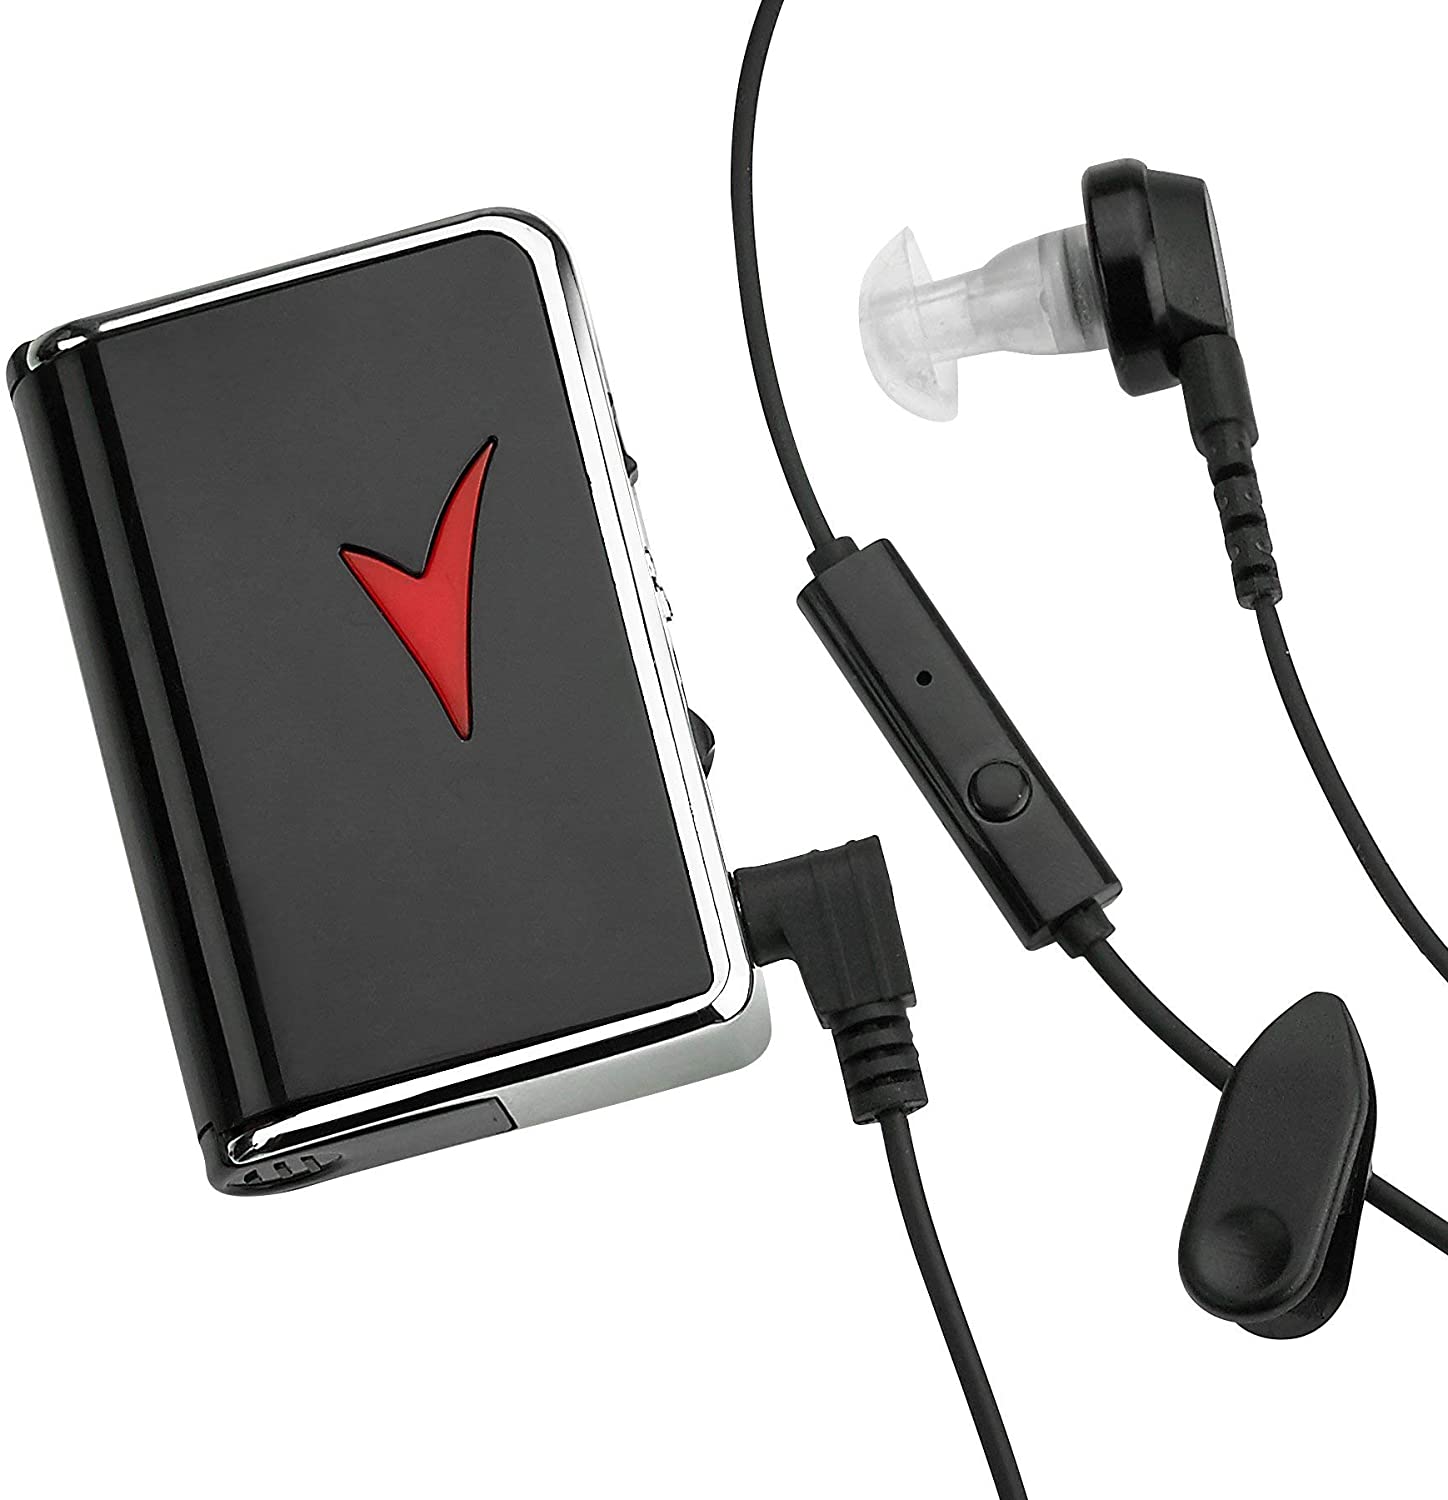 Latest Hearing aid Aids with Voice Enhancer